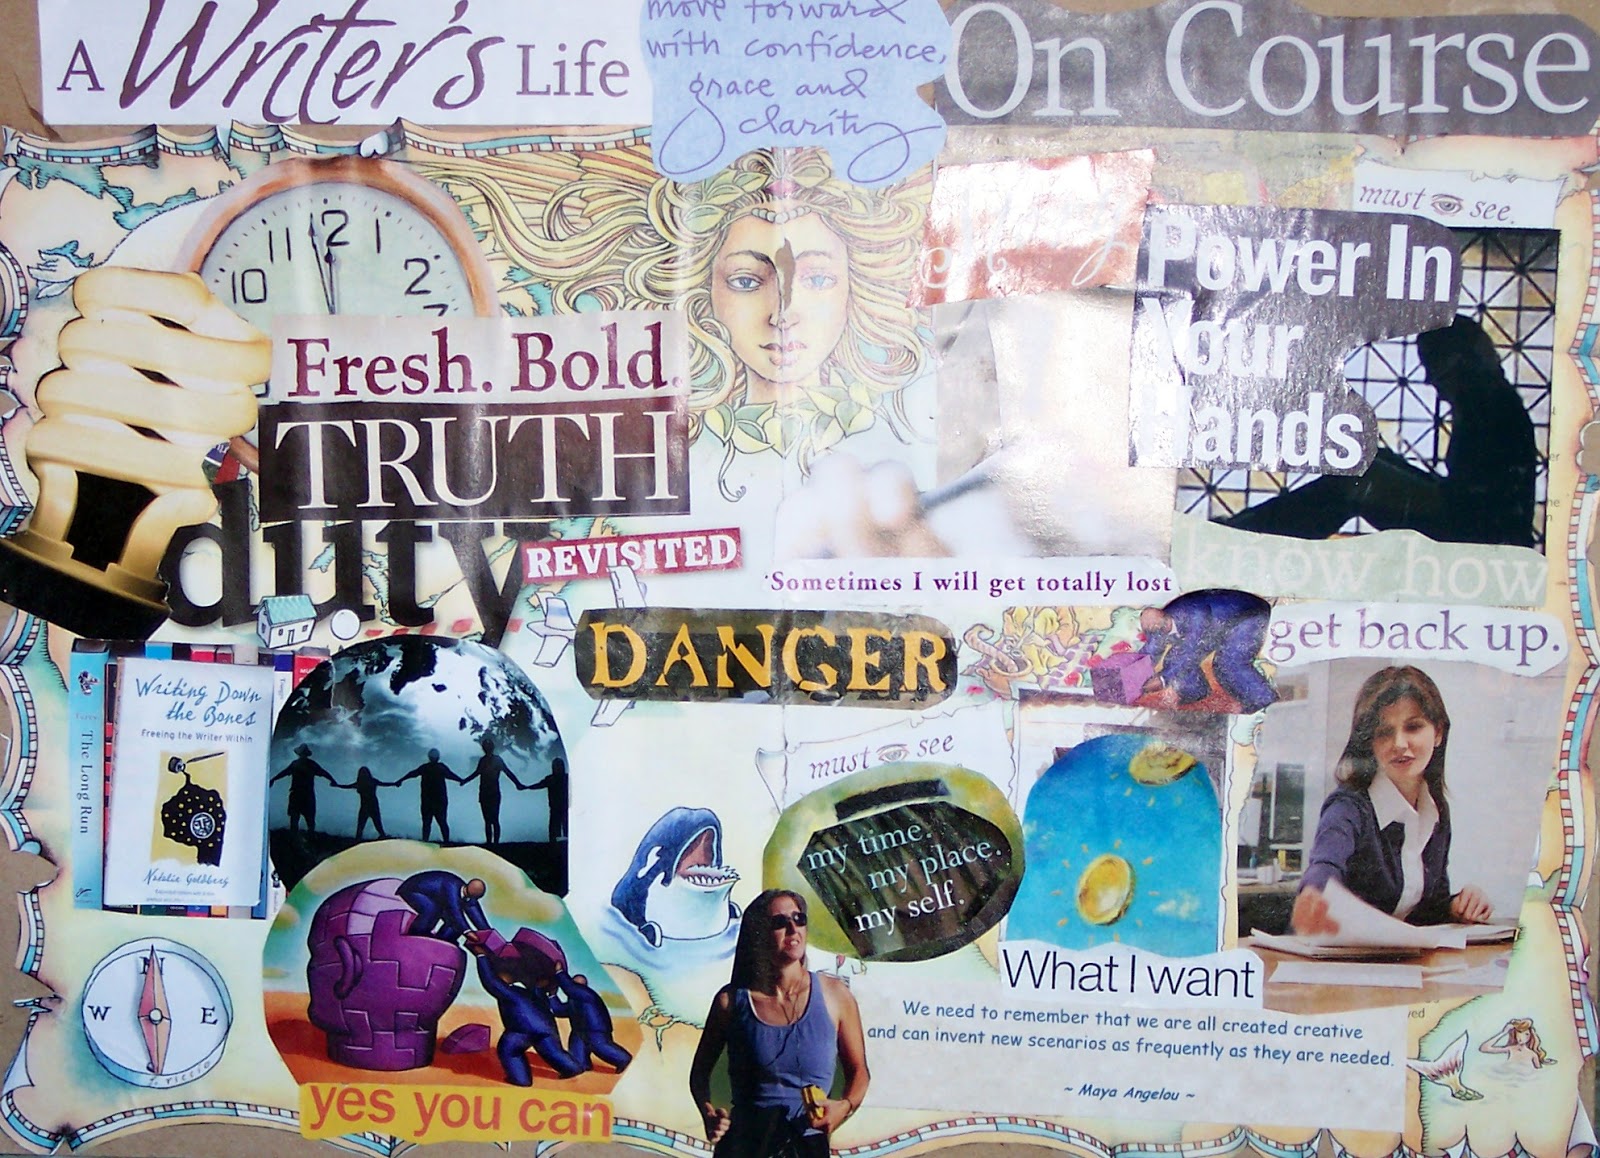 The BeeHive: January 11, 2013 • Vision Boards for the New Year